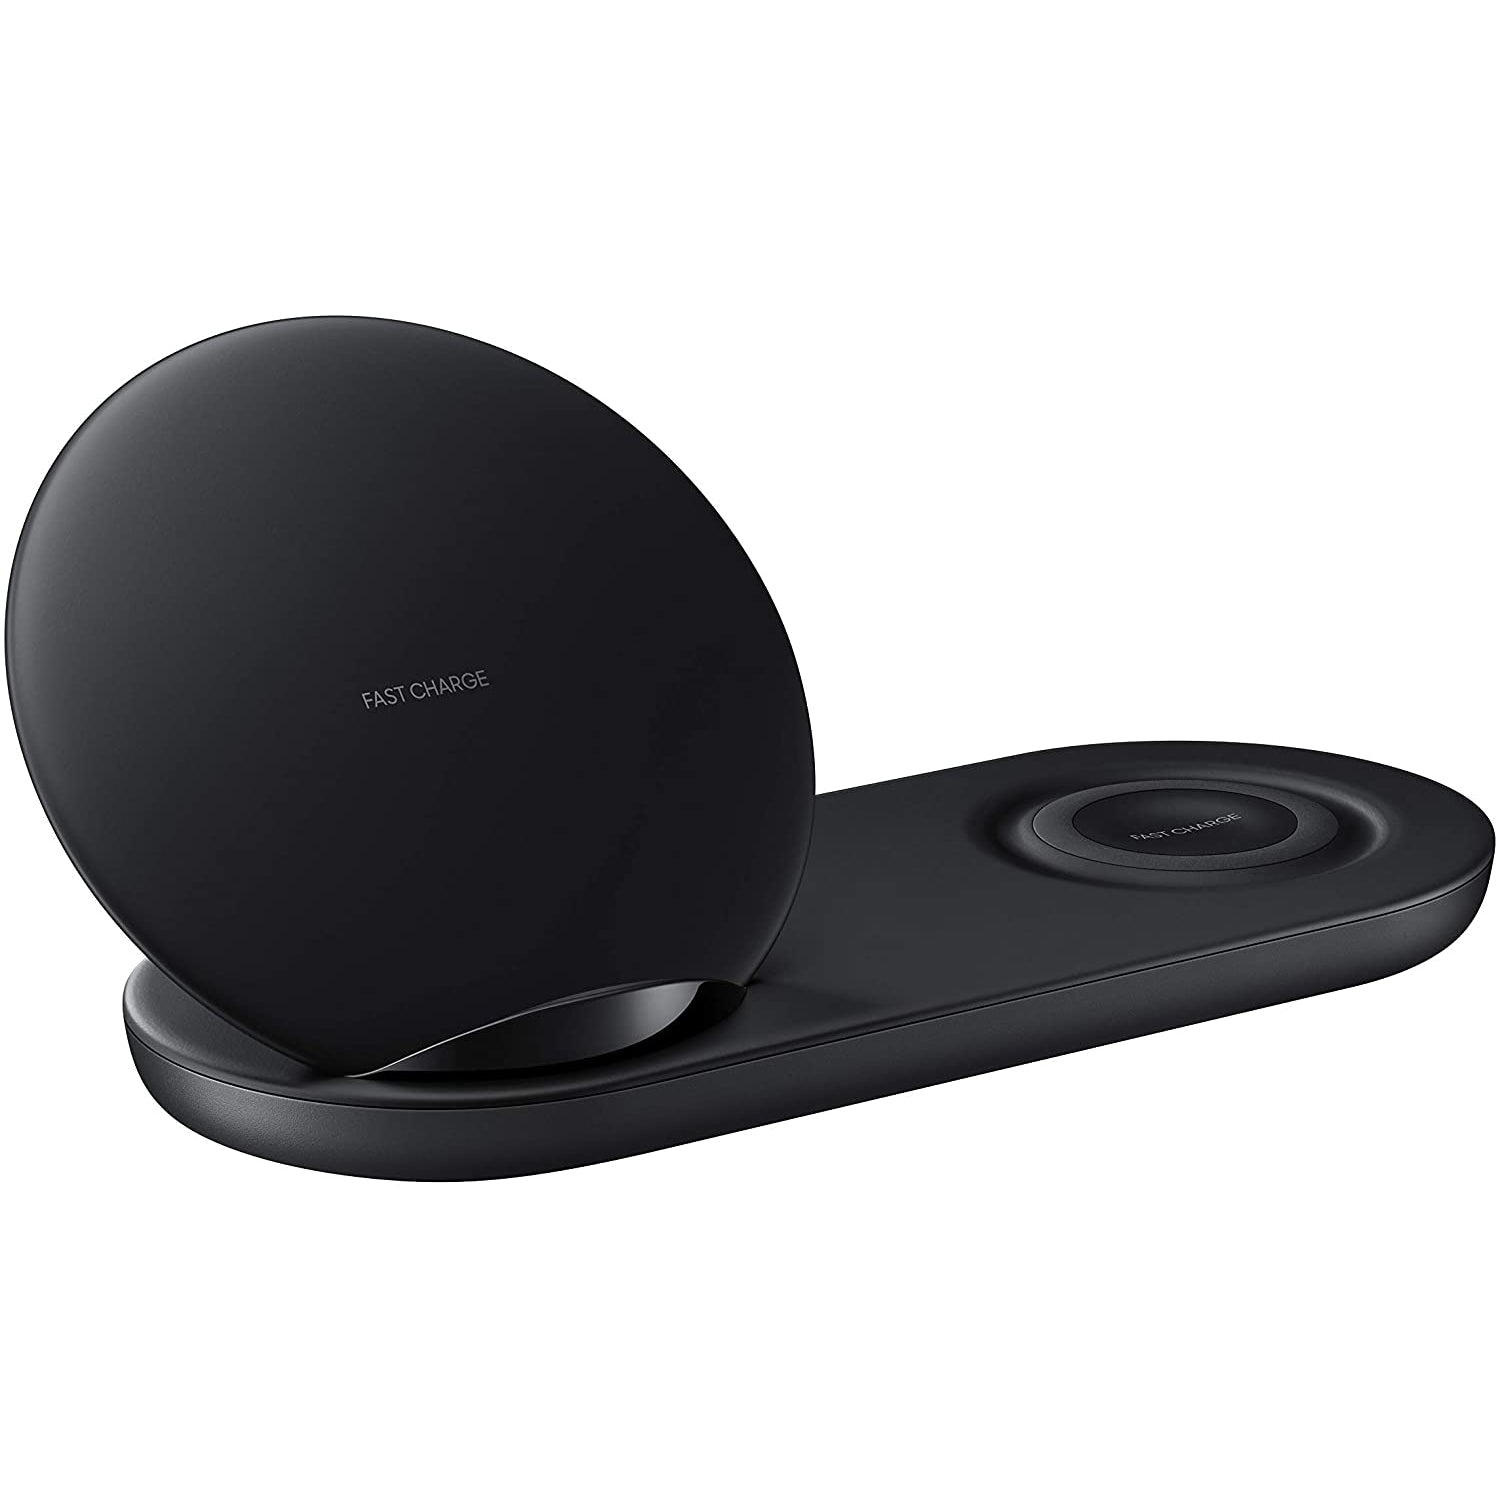 Samsung EP-N6100 Wireless Charger Duo for Galaxy Phone and Watch - New